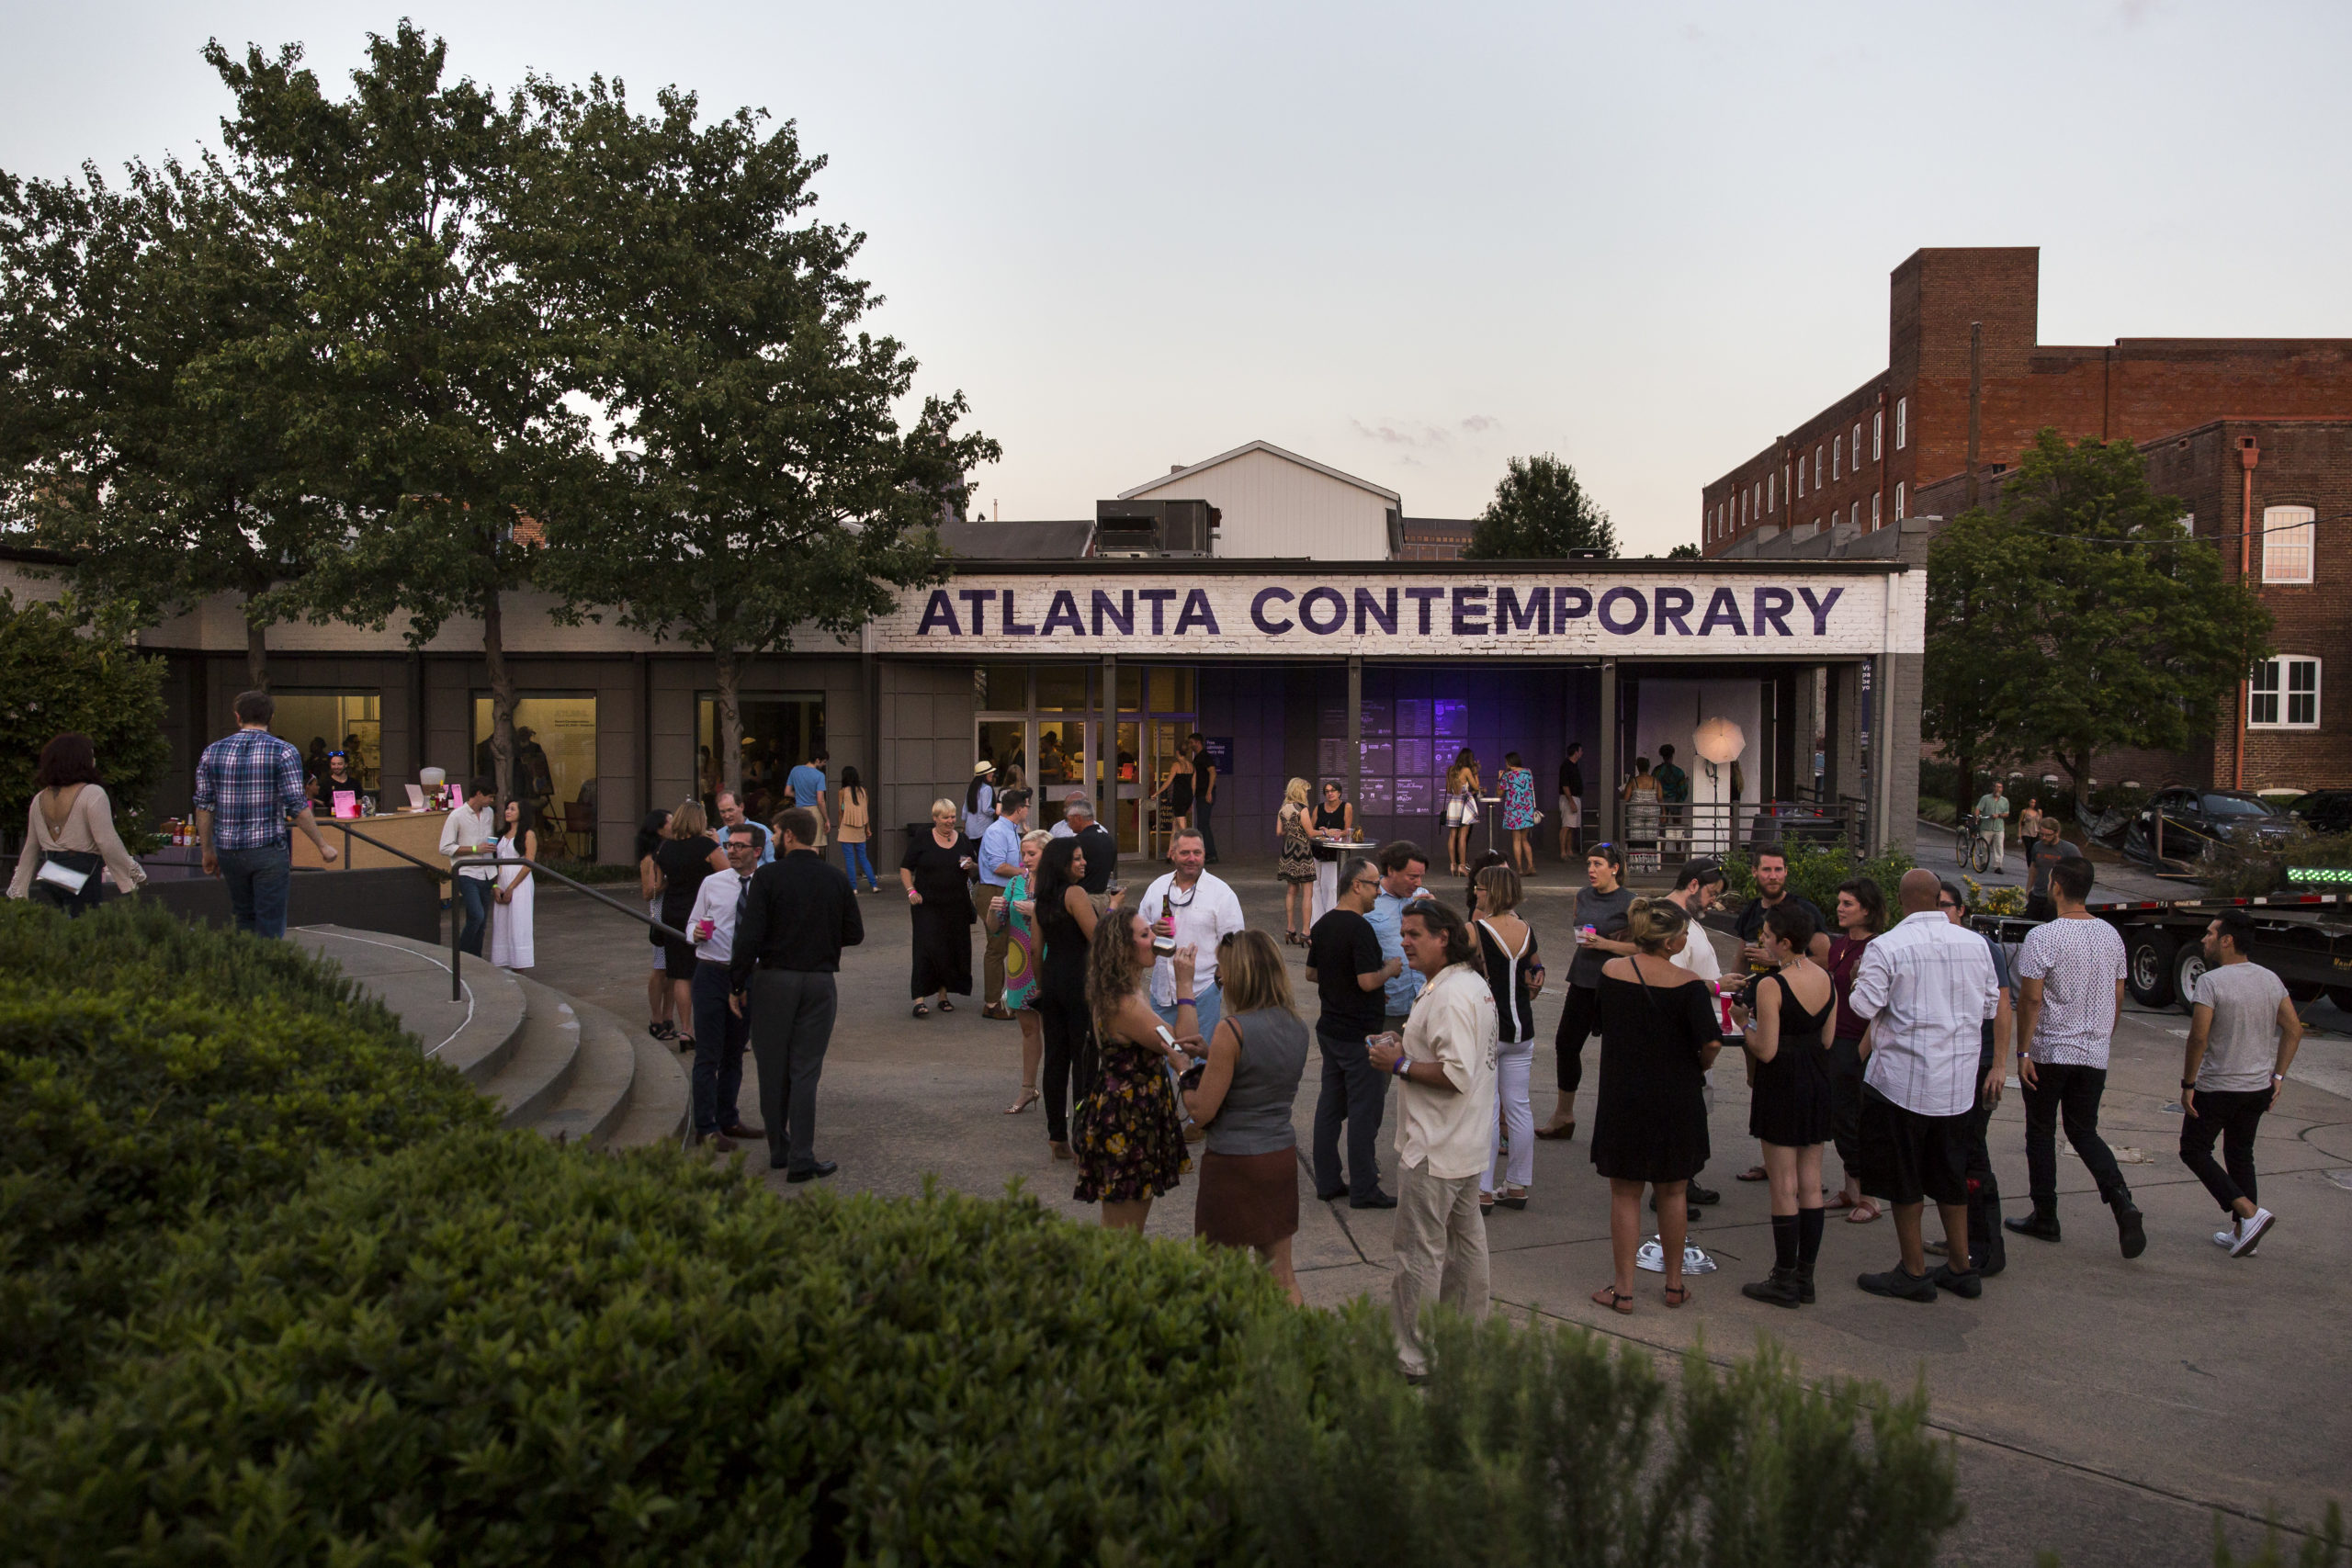 Exterior shot of Atlanta Contemporary with a crowd gathered, mingling